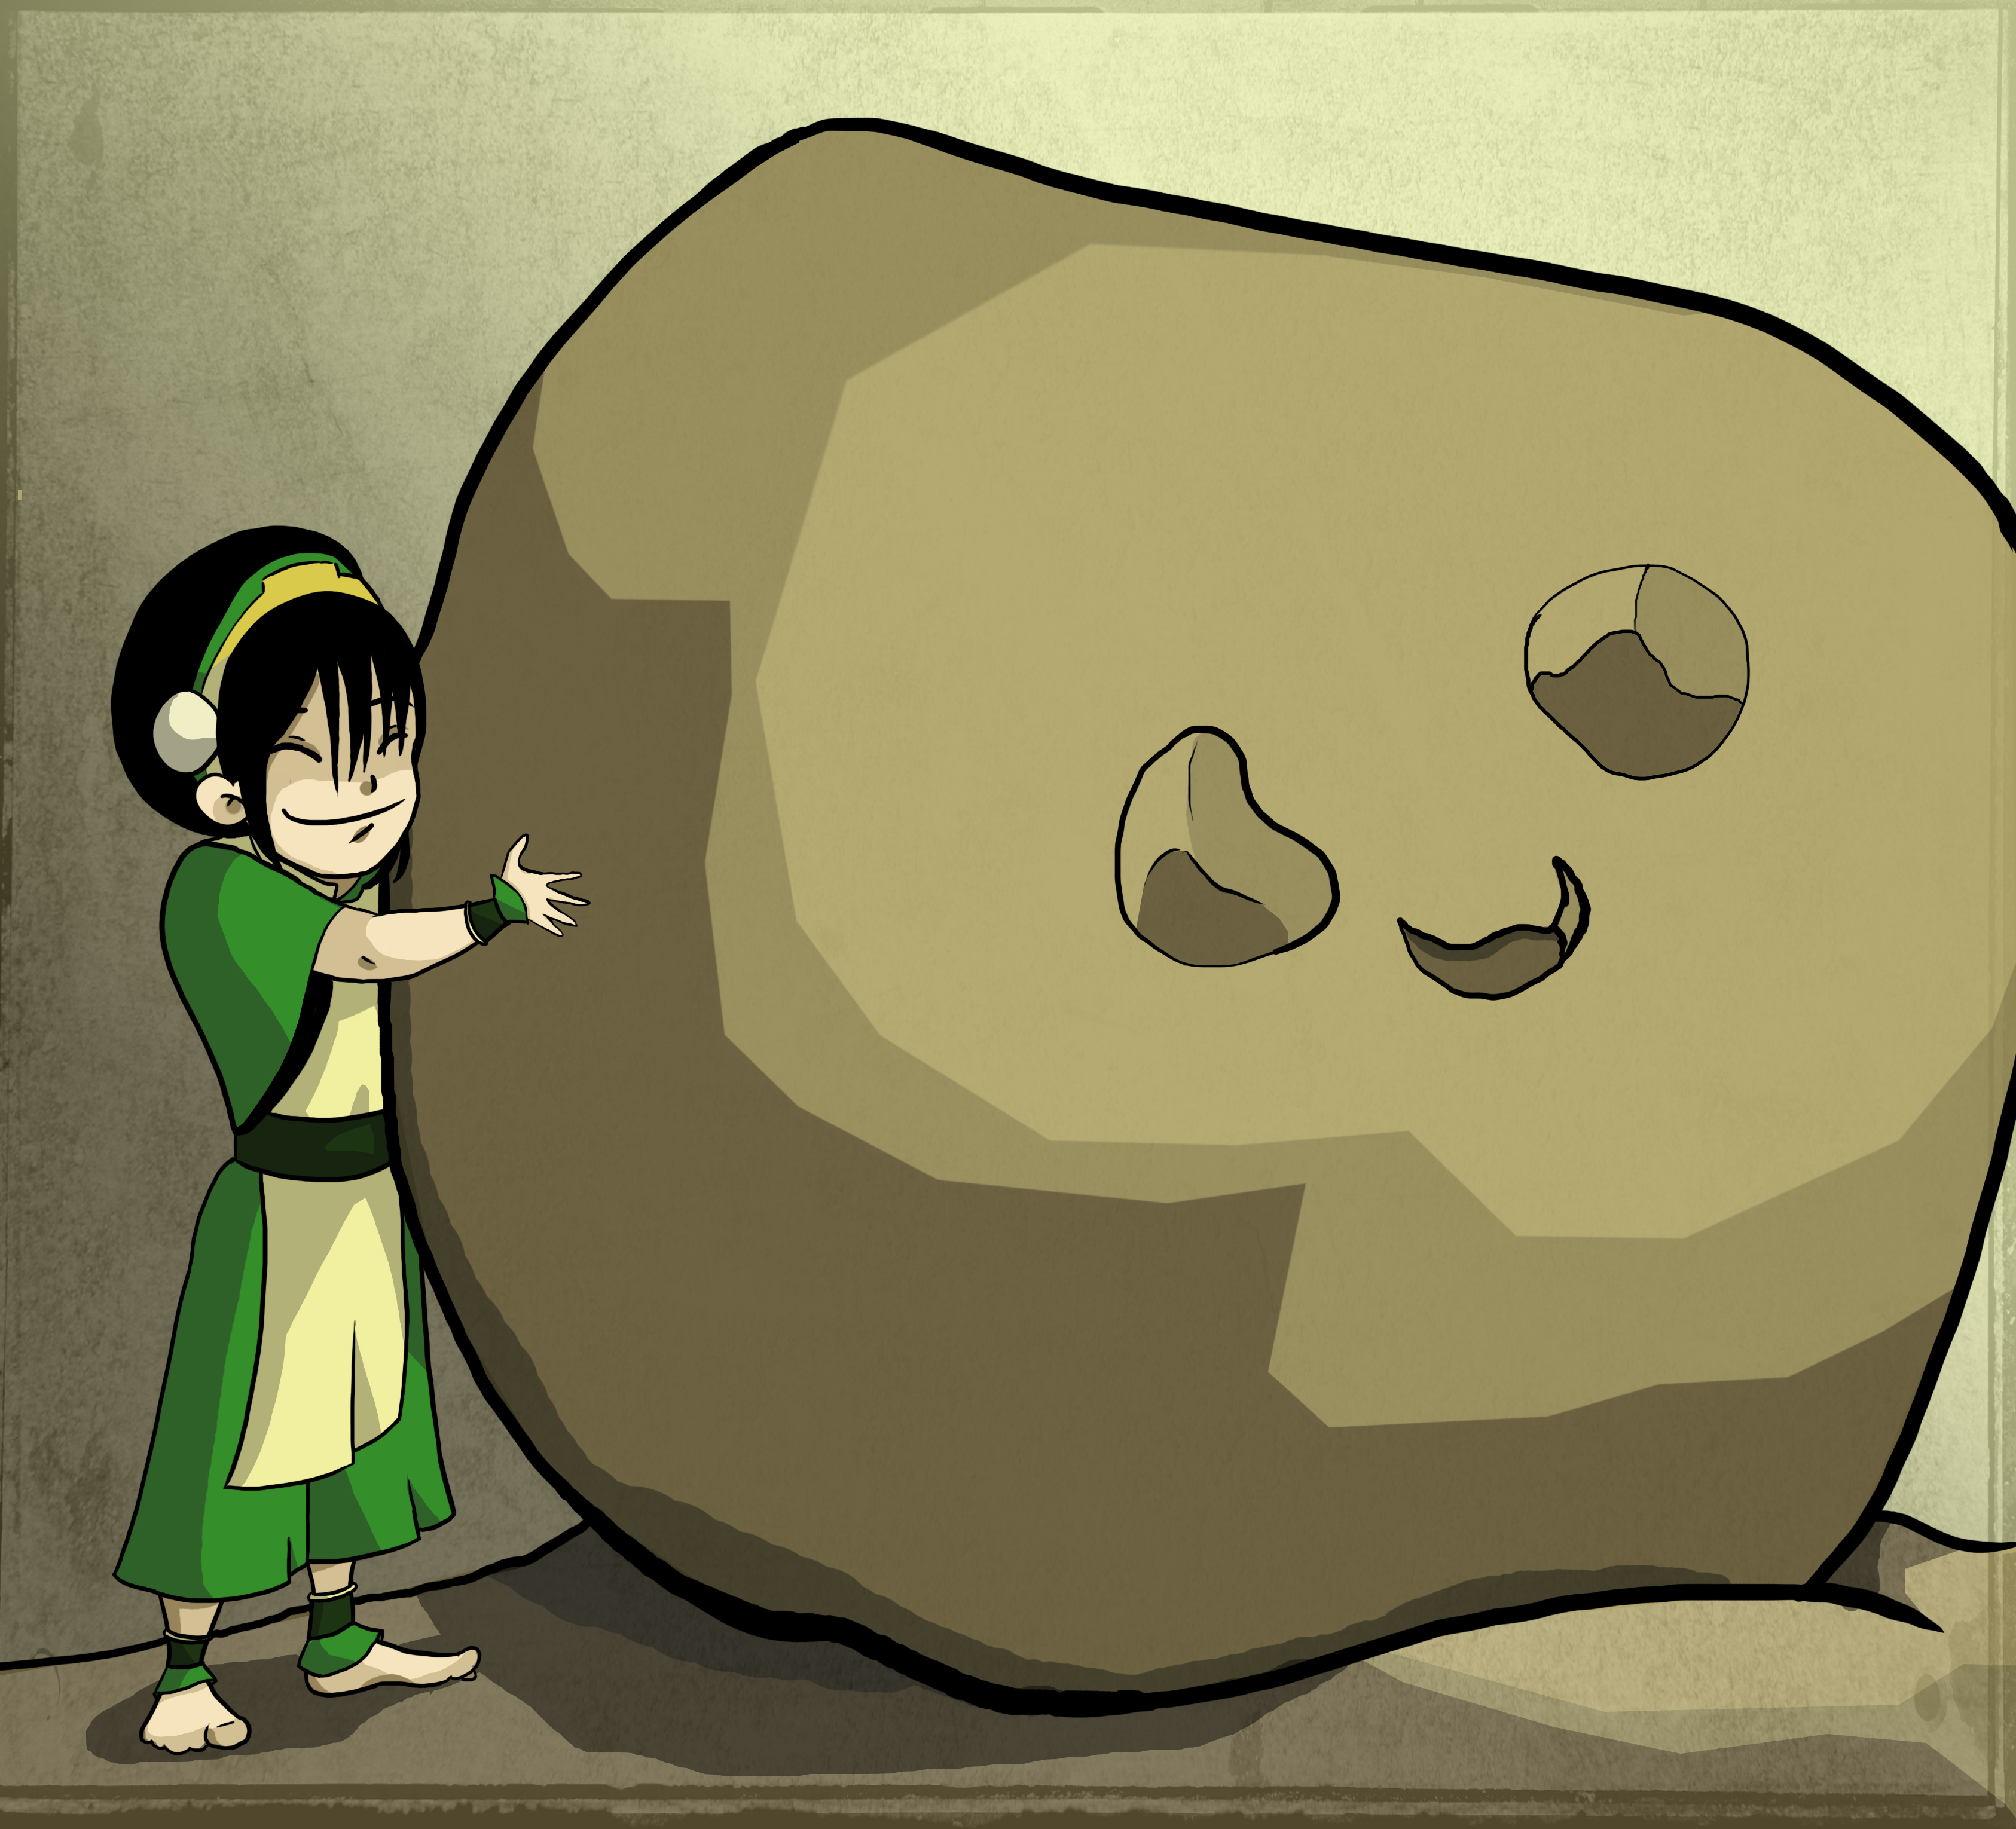 toph__s_pet_rock_by_fattybunny-d49t559.jpg